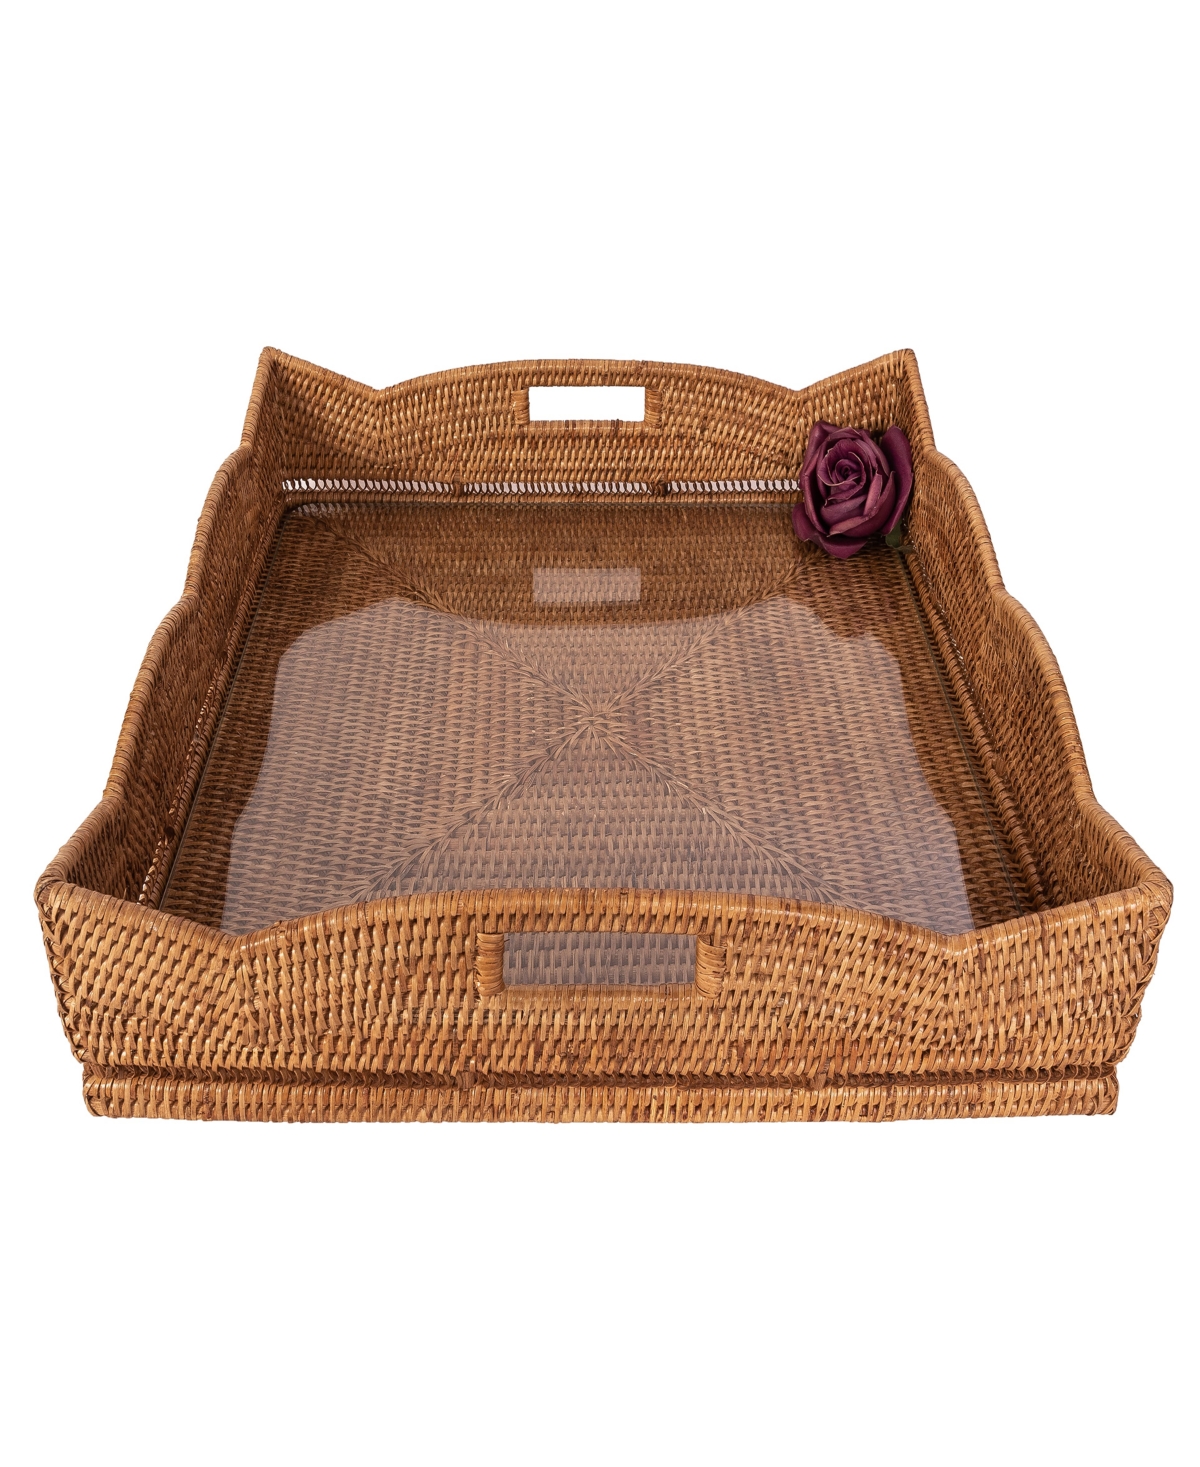 Artifacts Trading Company Artifacts Rattan Scallop Square Tray With Glass Insert In Honey Brown